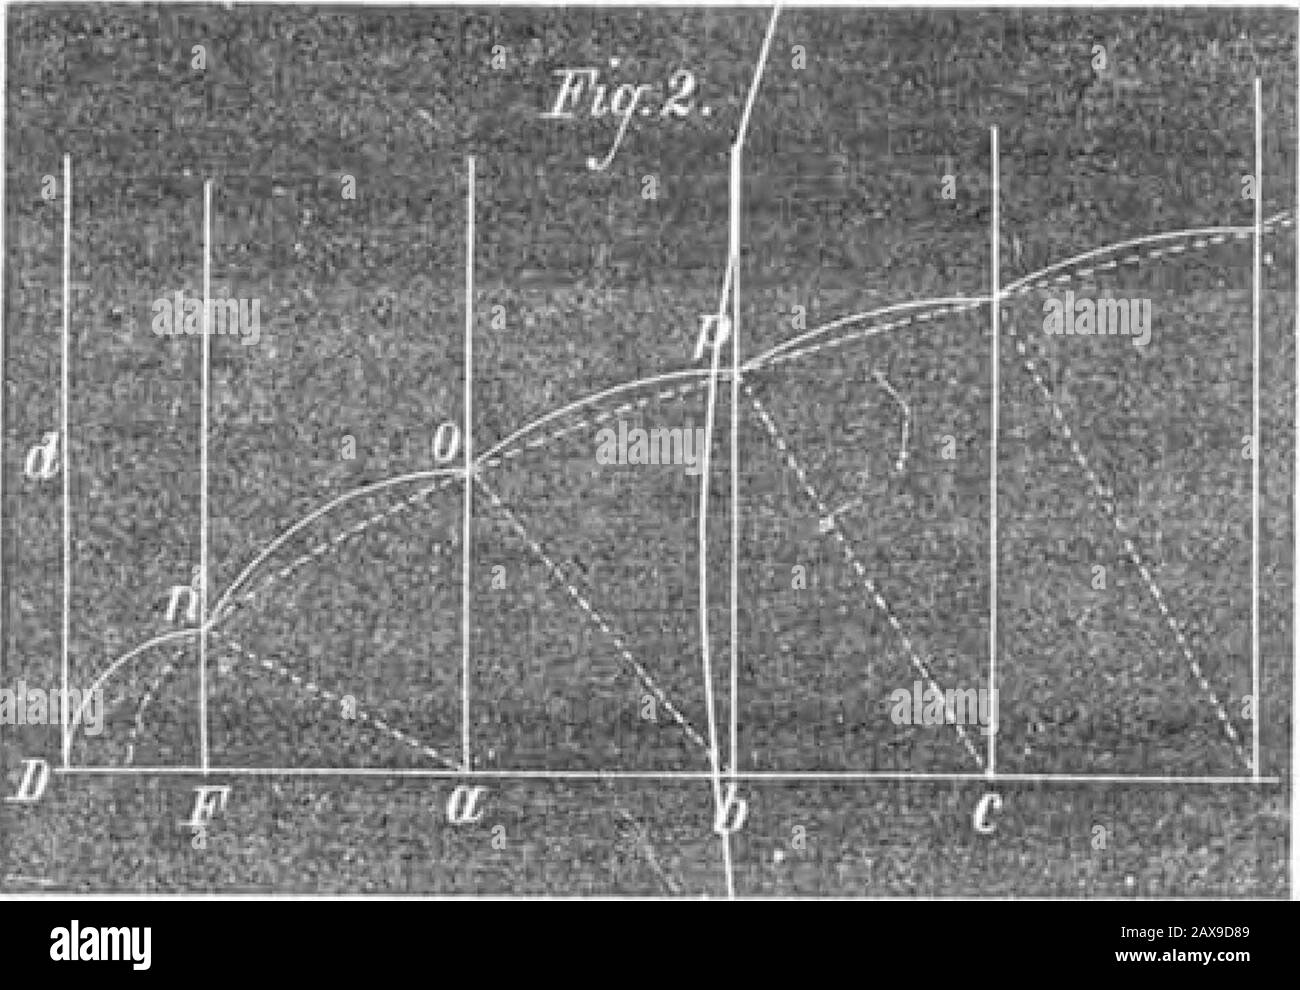 Scientific American Volume 31 Number 14 (October 1874) . nged or hastened. 62 Cannon street, New York. John T. Hawkins. To Draw a Parabola. 1o the Editor of the Scientific American : A very convenient way to draw this curve is as follows:On the principal diameter, Fig. 1, lay off the proposed di-rectrix, D d, and focus, F. With F as a center describe arcs,a c, at convenient distances from each other. From a, setoff a b equal D F, and draw b c perpendicular to D F b. Thenwill the intersections, c, be points in the required curve. M&lt;r.l. f b a b a While geometrically accurate, this method ha Stock Photo